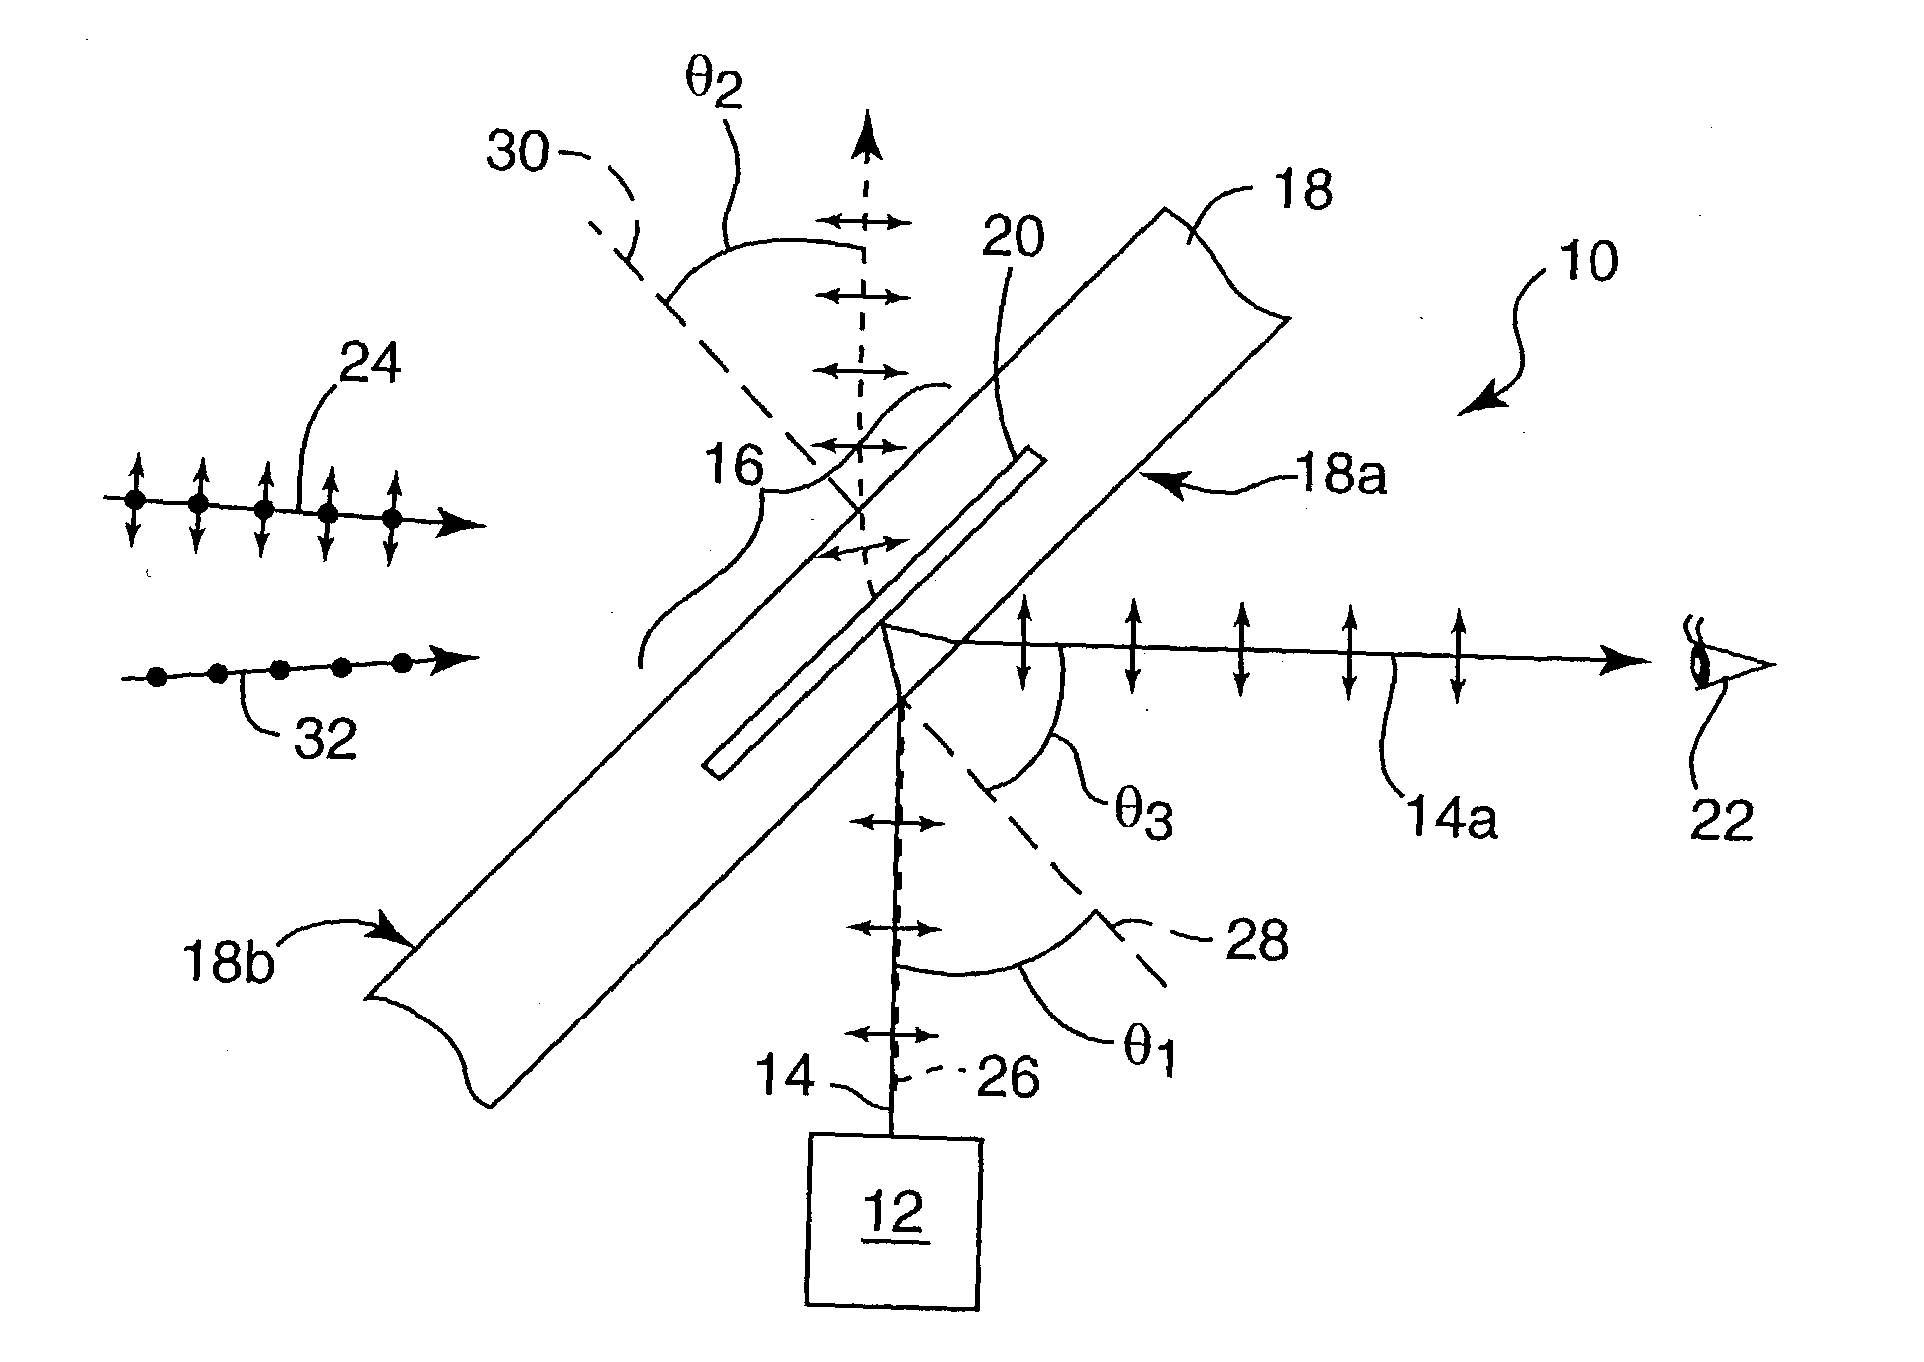 Head-up display with polarized light source and wide-angle p-polarization reflective polarizer